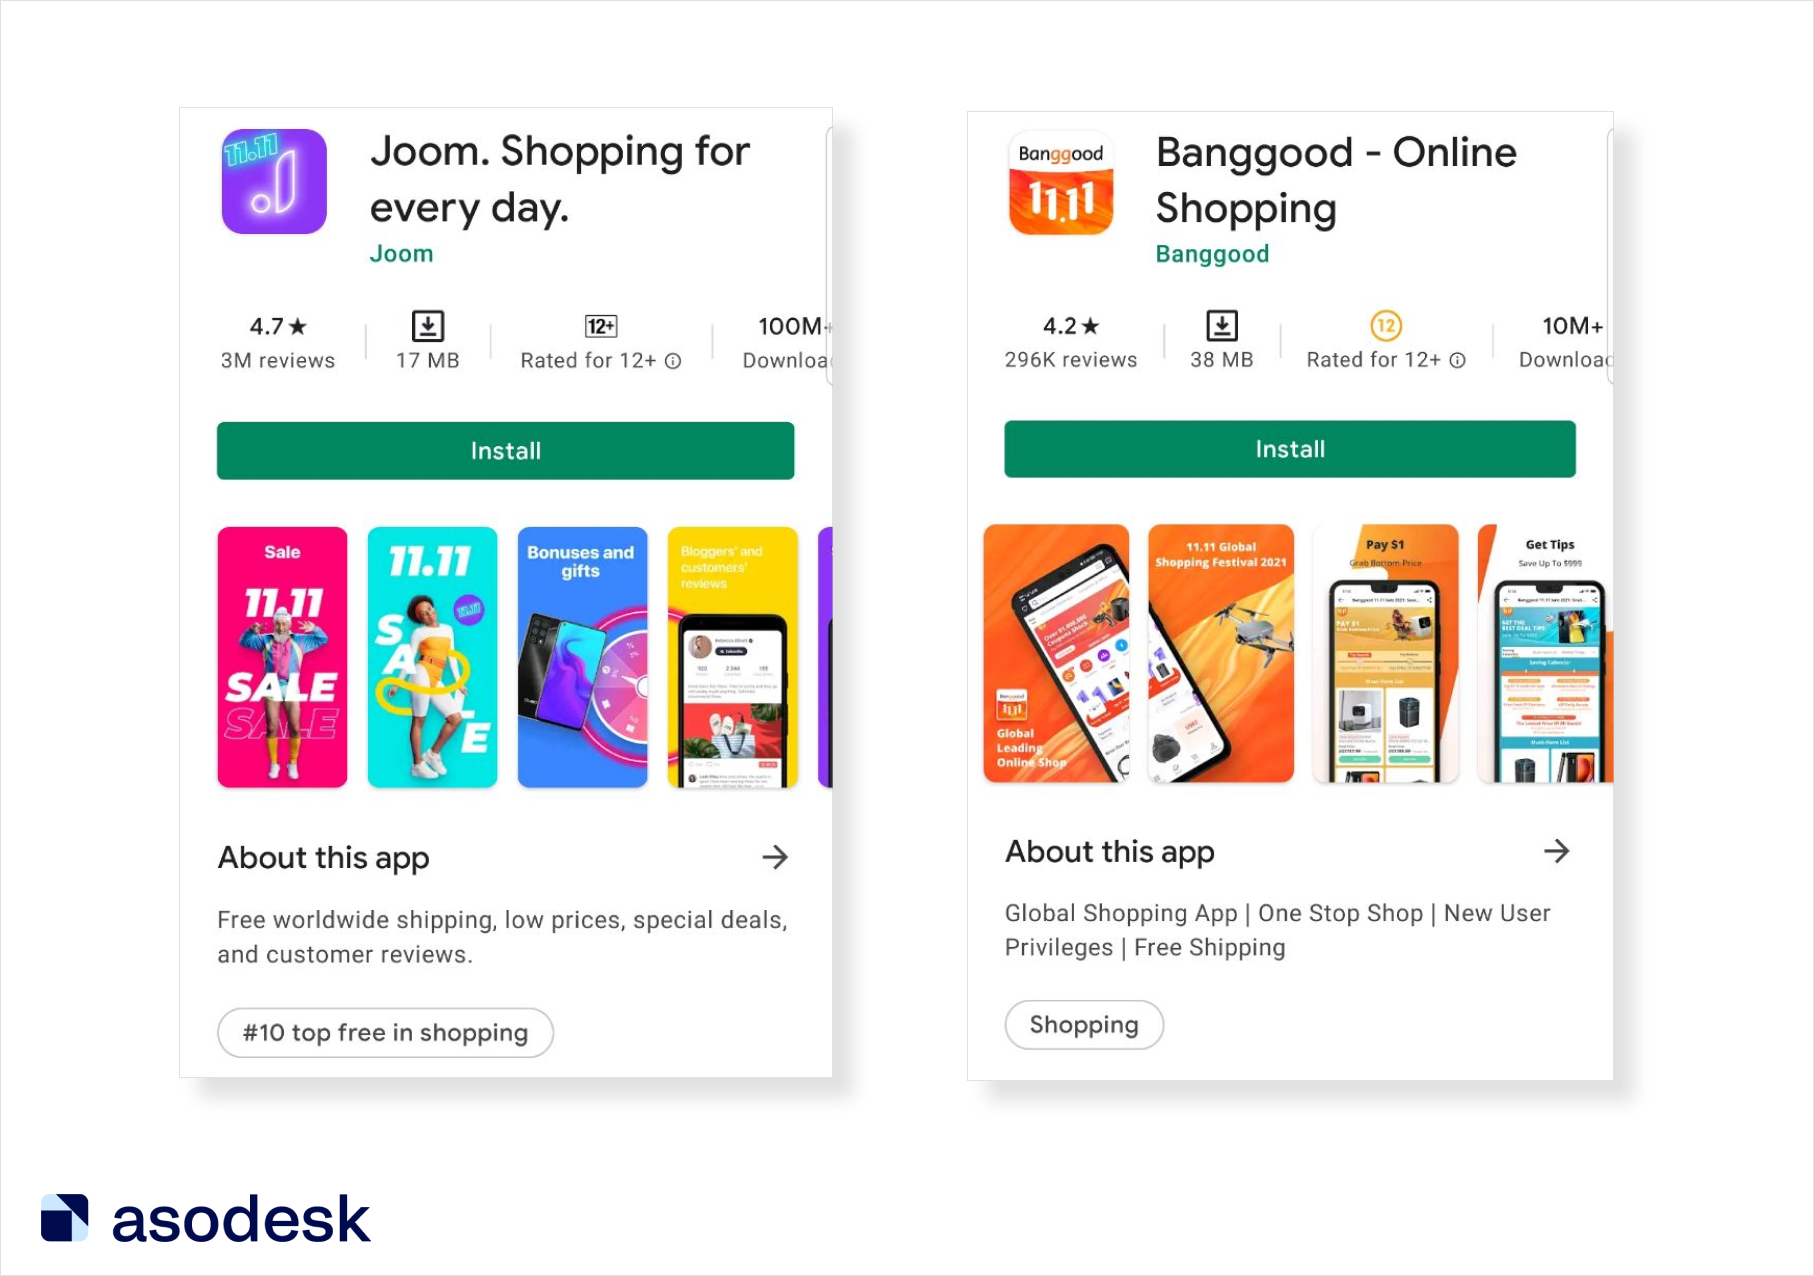 The design of the Joom and Bangood app pages before the 11.11 promo on Google Play